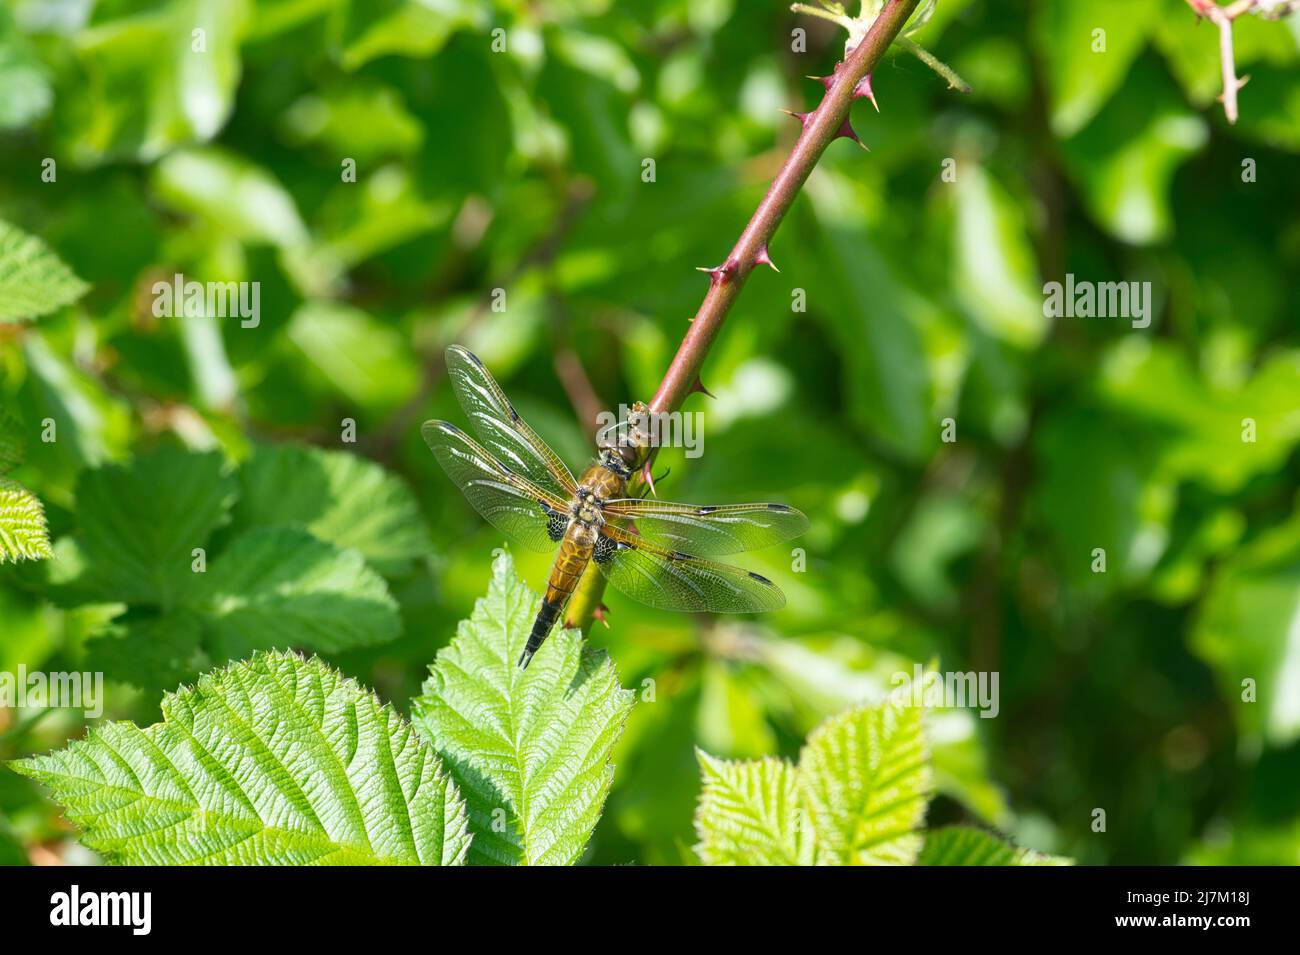 Four-spotted chaser (Libellula quadrimaculata) dragonfly perched on a bramble Stock Photo